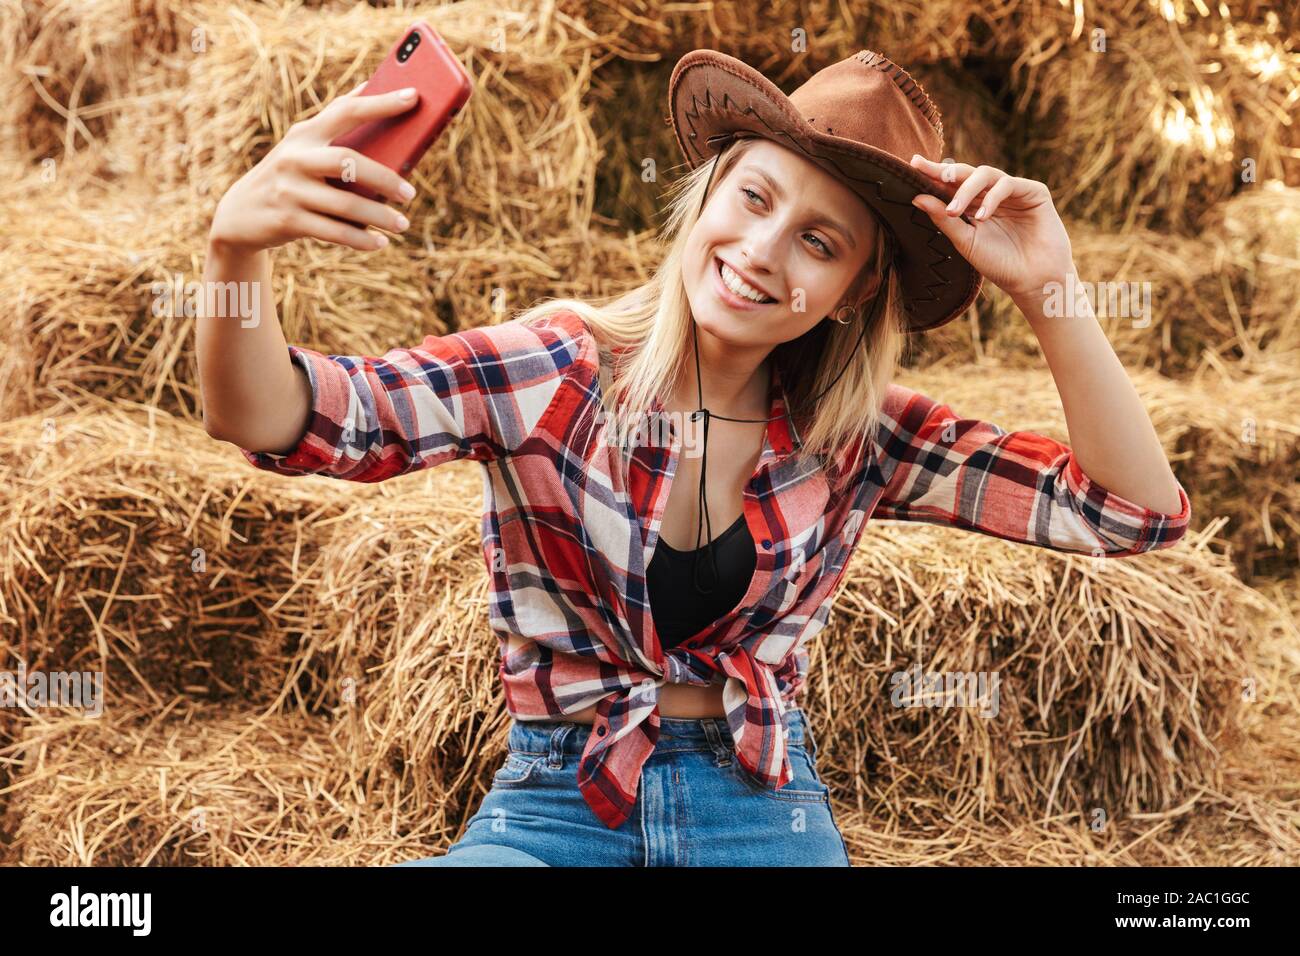 Smiling cheerful young blonde cowgirl sitting on a haystack at the barn, taking a selfie Stock Photo